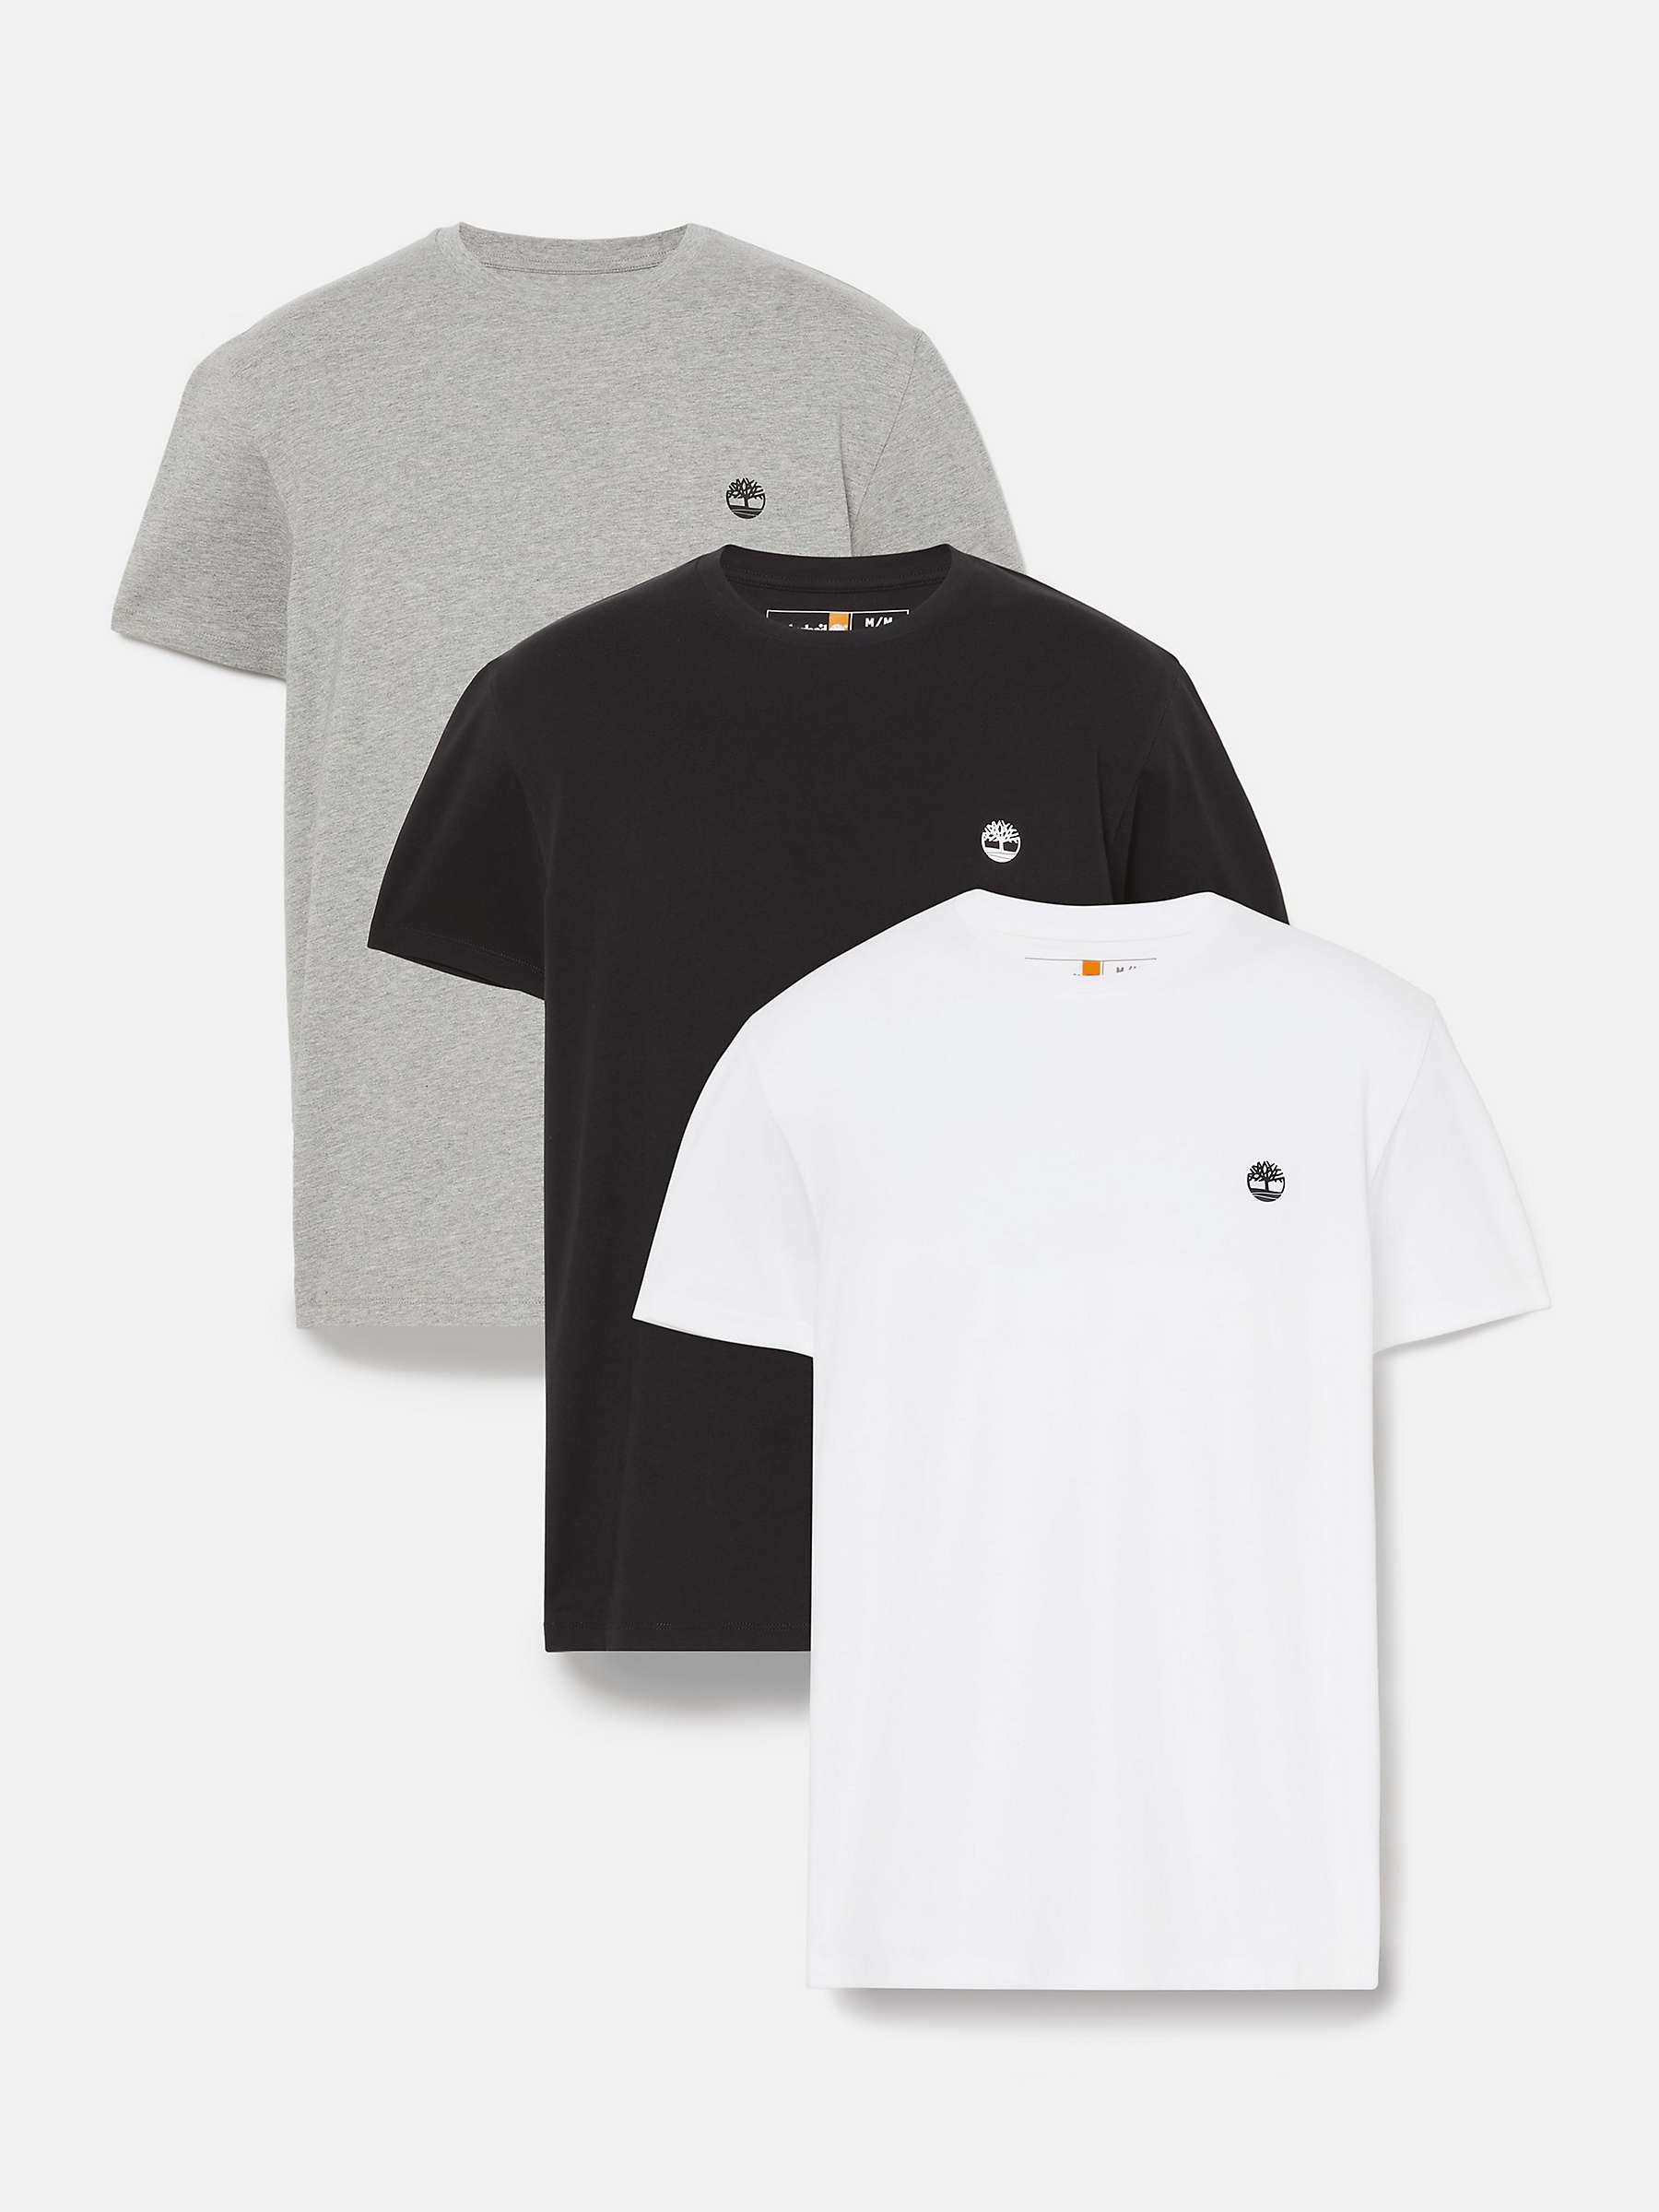 Buy Timberland Slim Fit Basic Jersey T-Shirt, Pack of 3, Multi Online at johnlewis.com